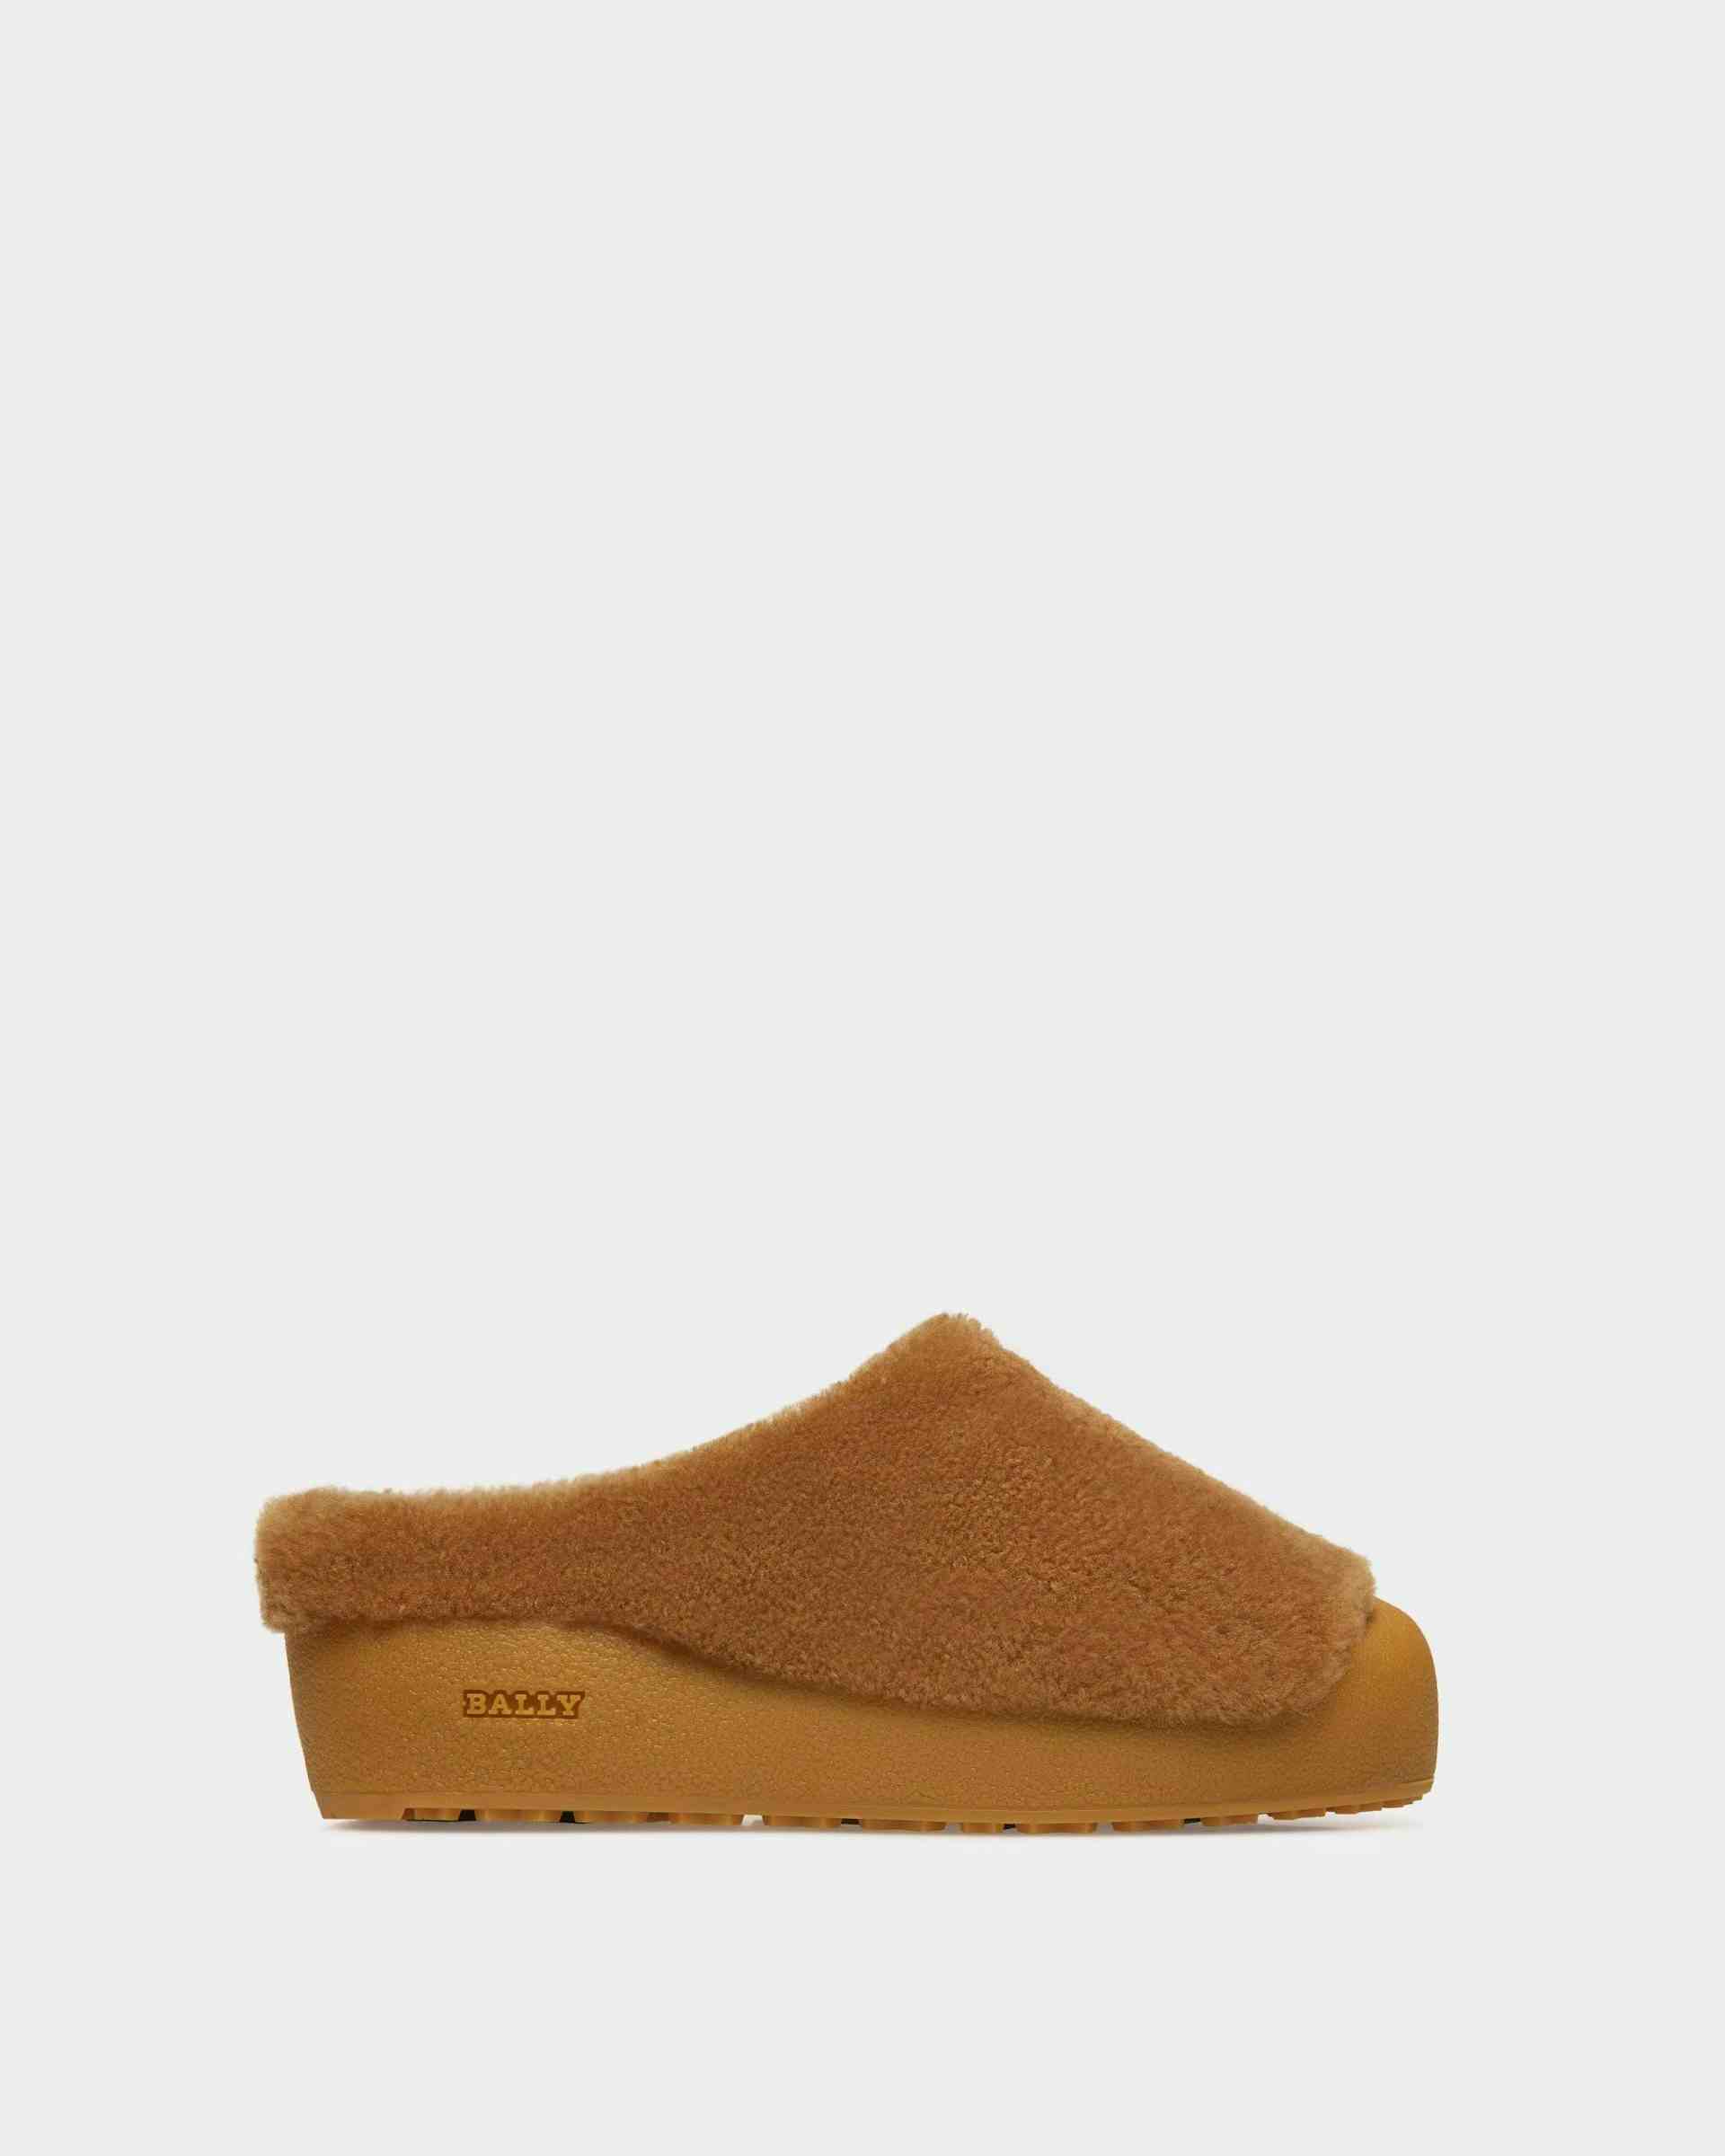 Crans Leather Slippers In Camel - Men's - Bally